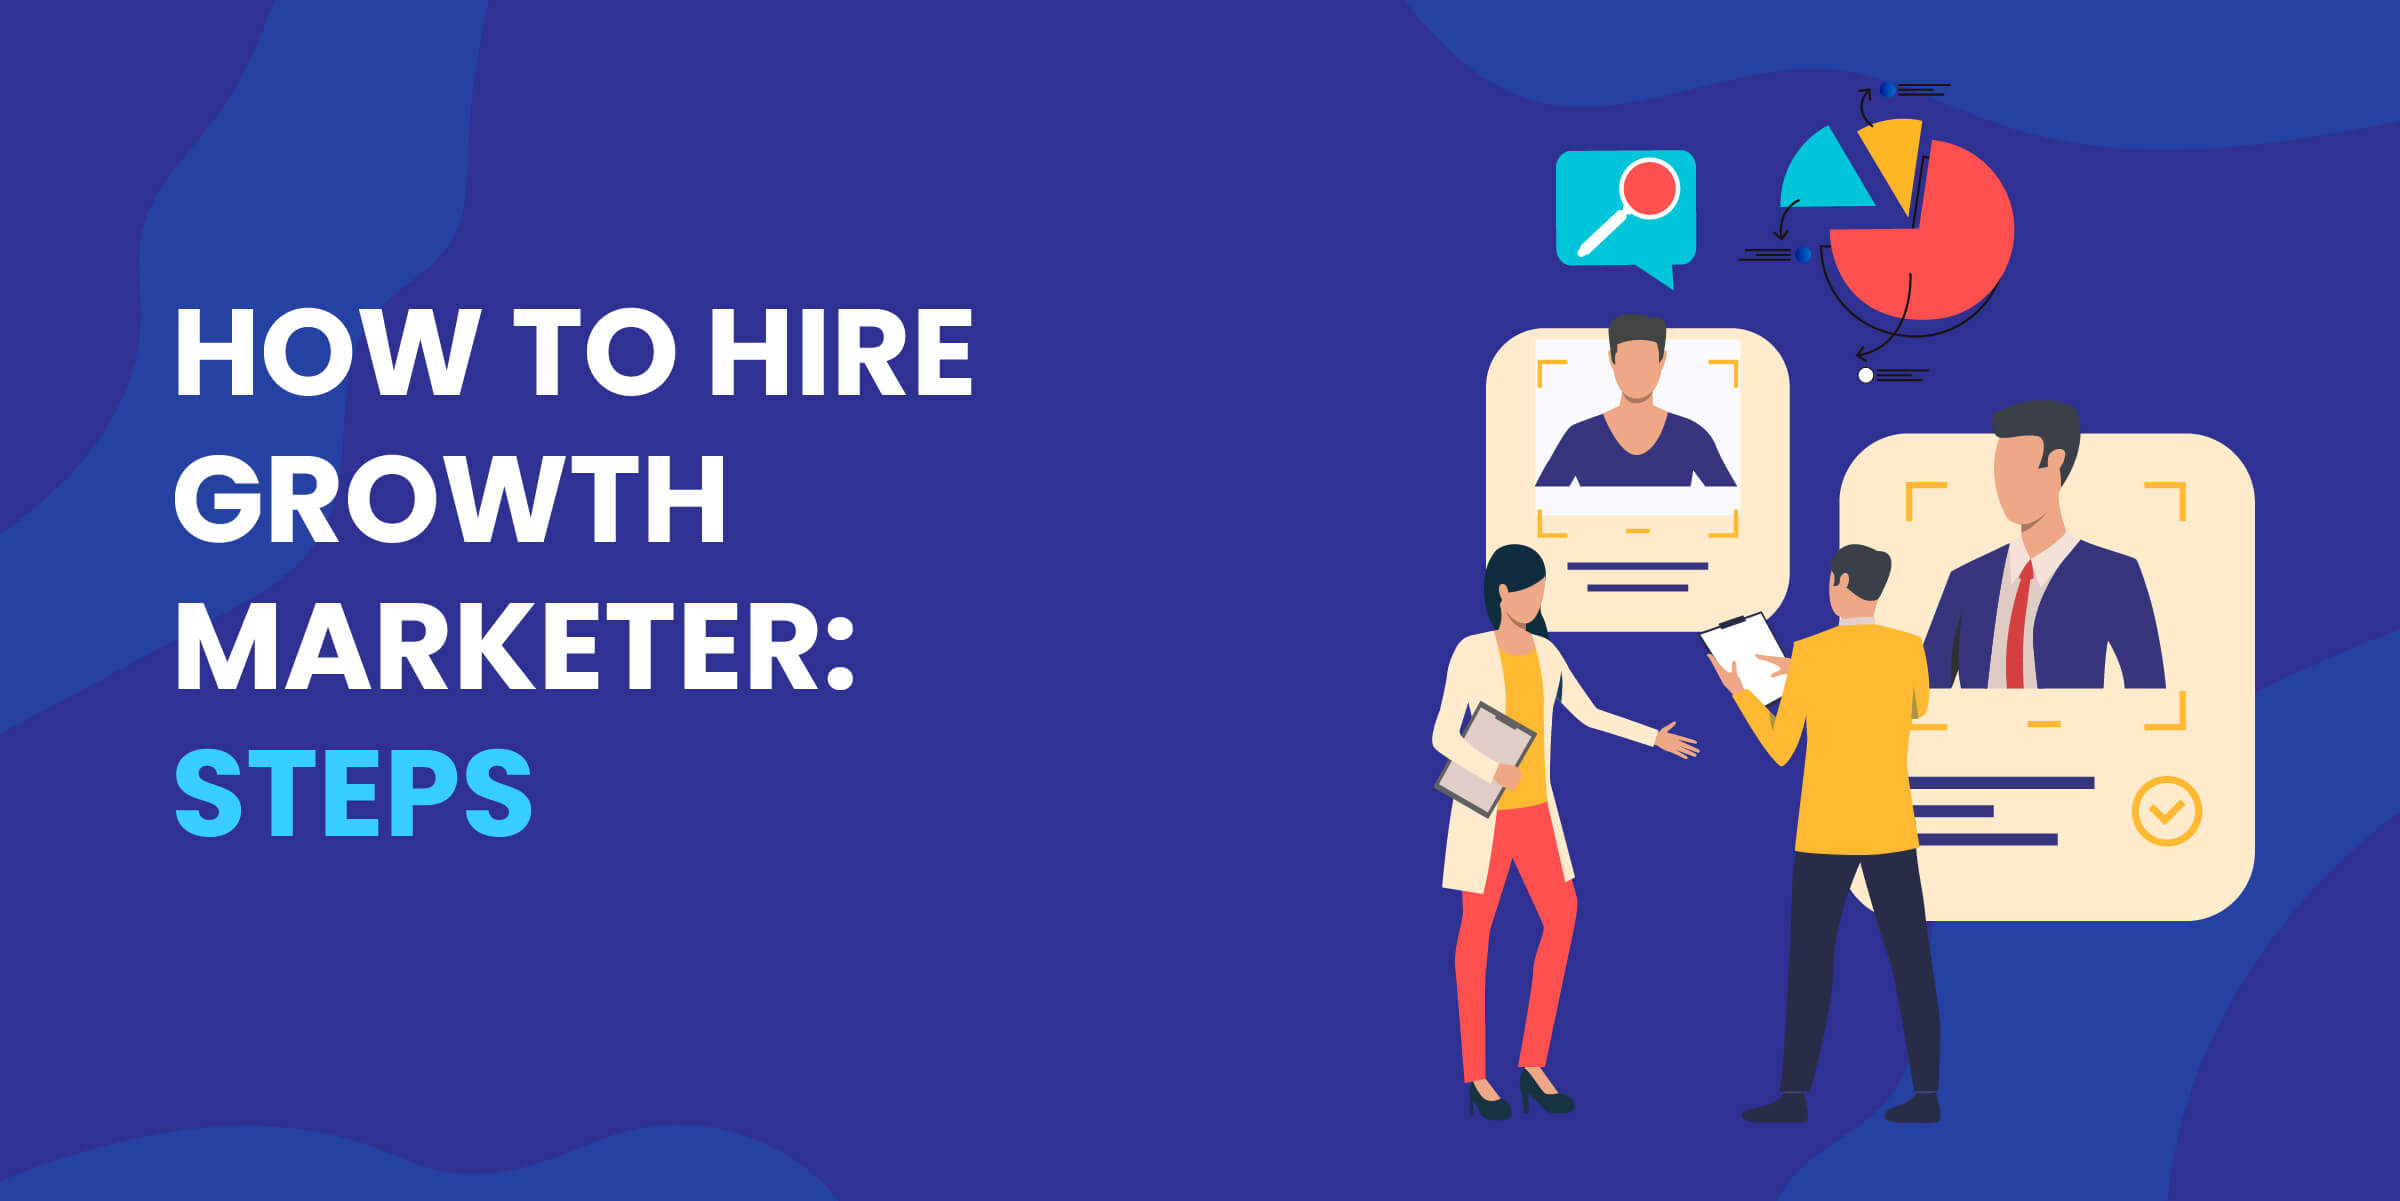 How to Hire Growth Marketer Steps